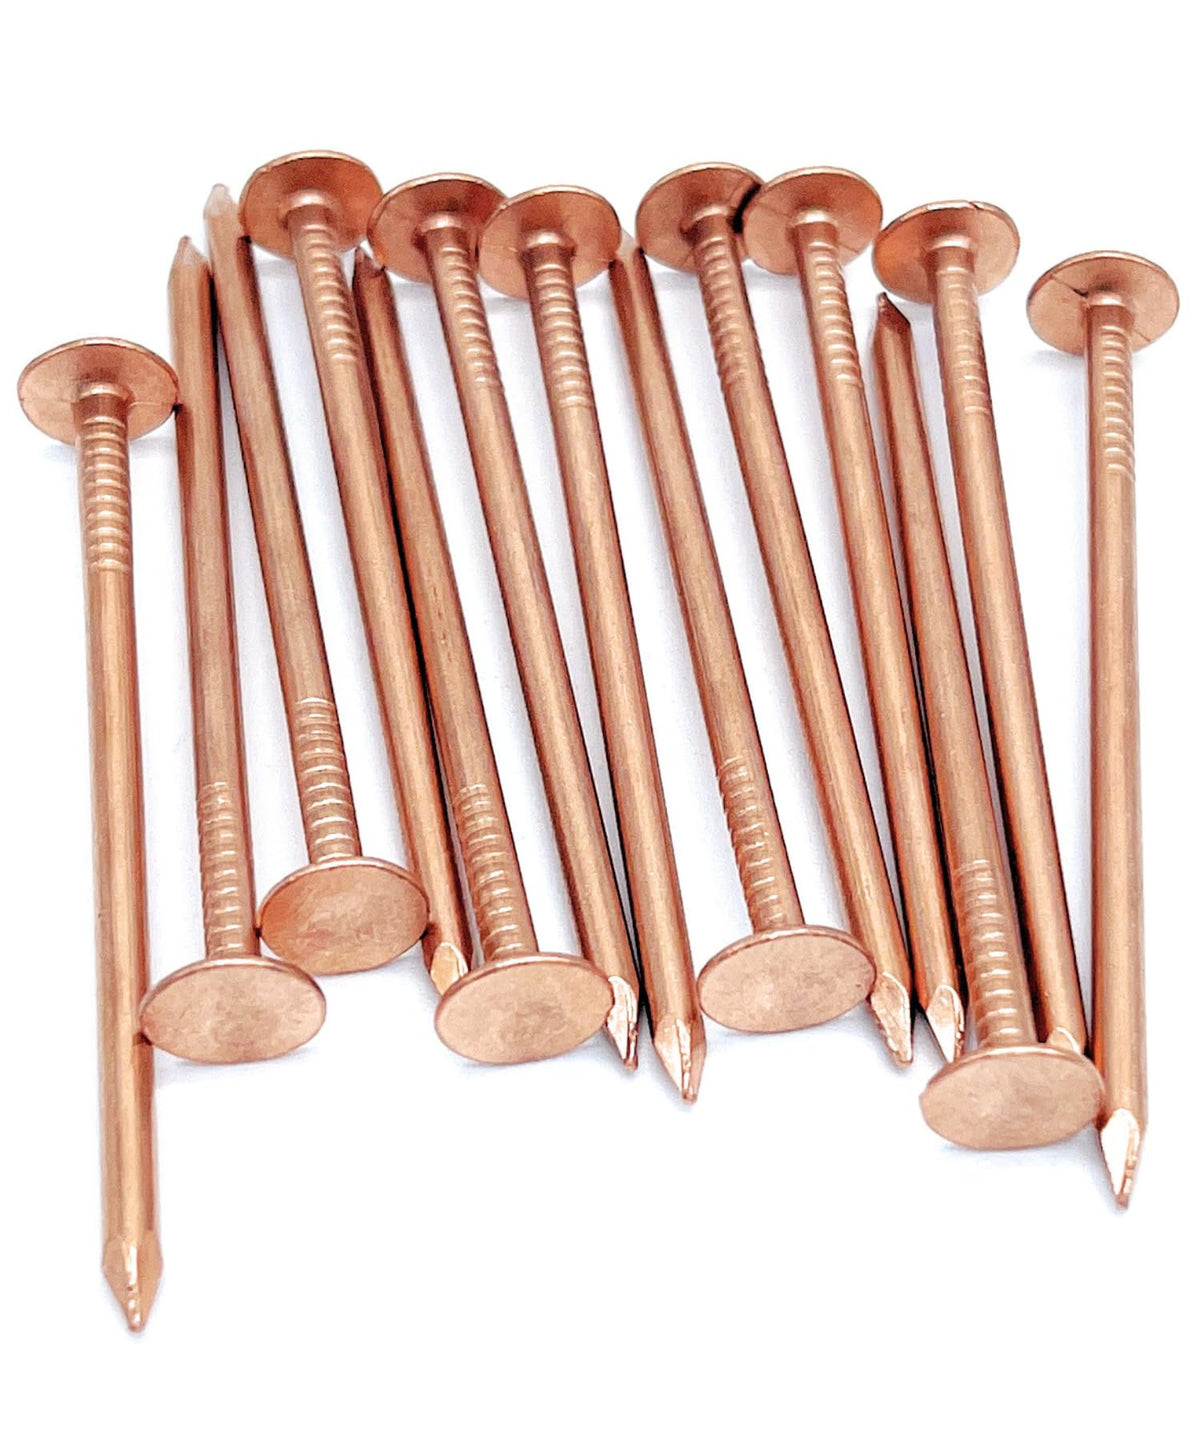 2.5 Inch Copper Nails Roofing Finish Nails USA MADE - Solid Pure Copper Slating Nails Spikes Flashing Furniture Boat - Package Includes The Highest Quality Copper Nails by Dubbs Hardware